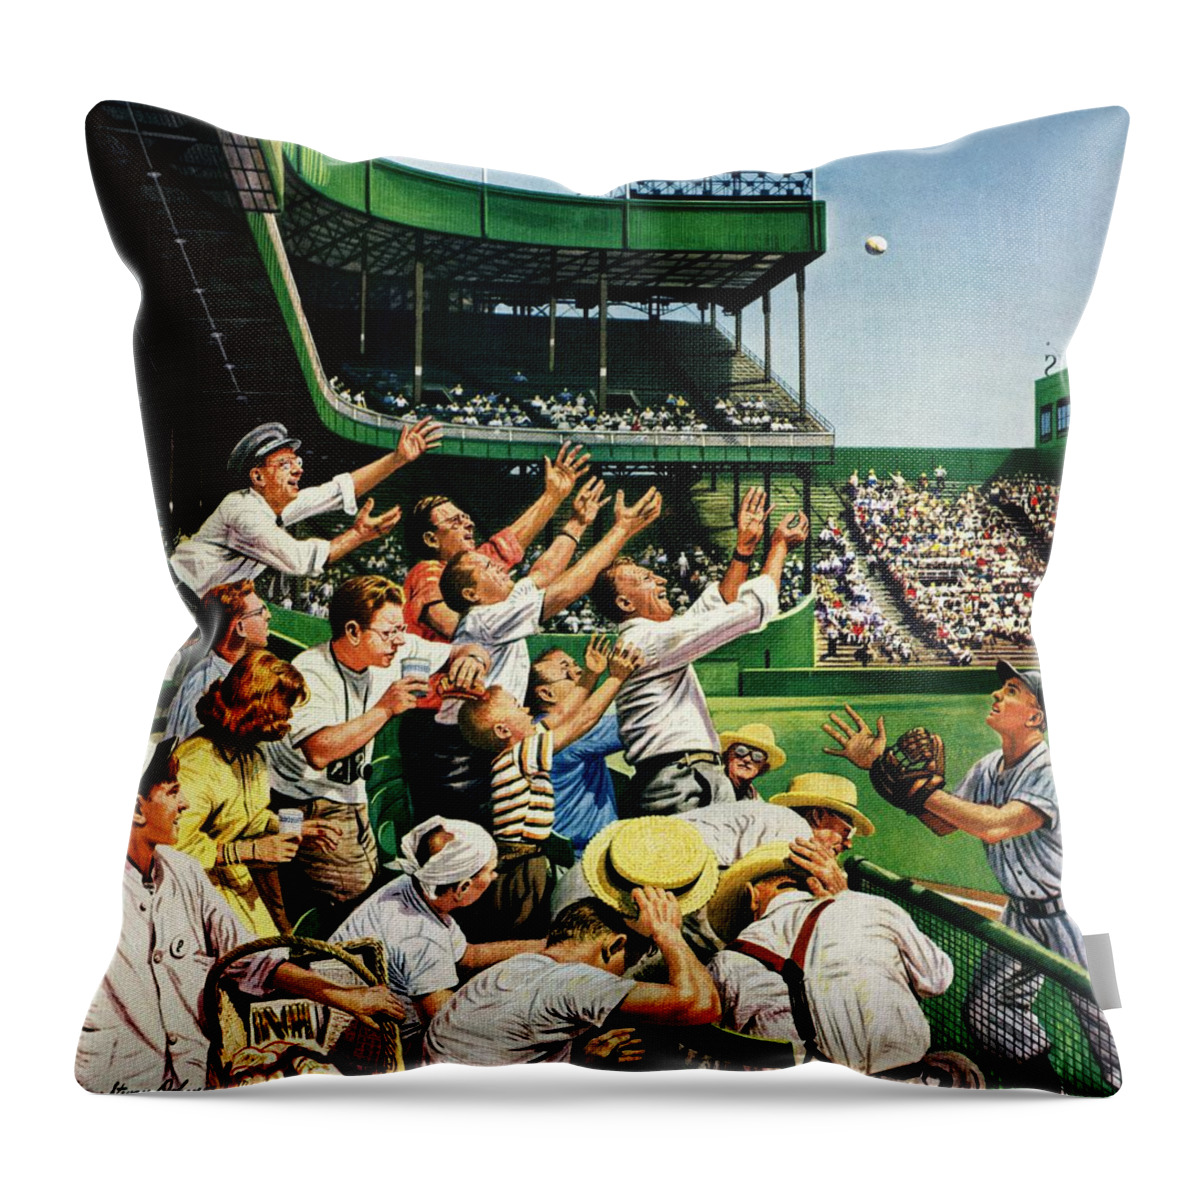 Baseball Throw Pillow featuring the drawing Catching Home Run Ball by Stevan Dohanos